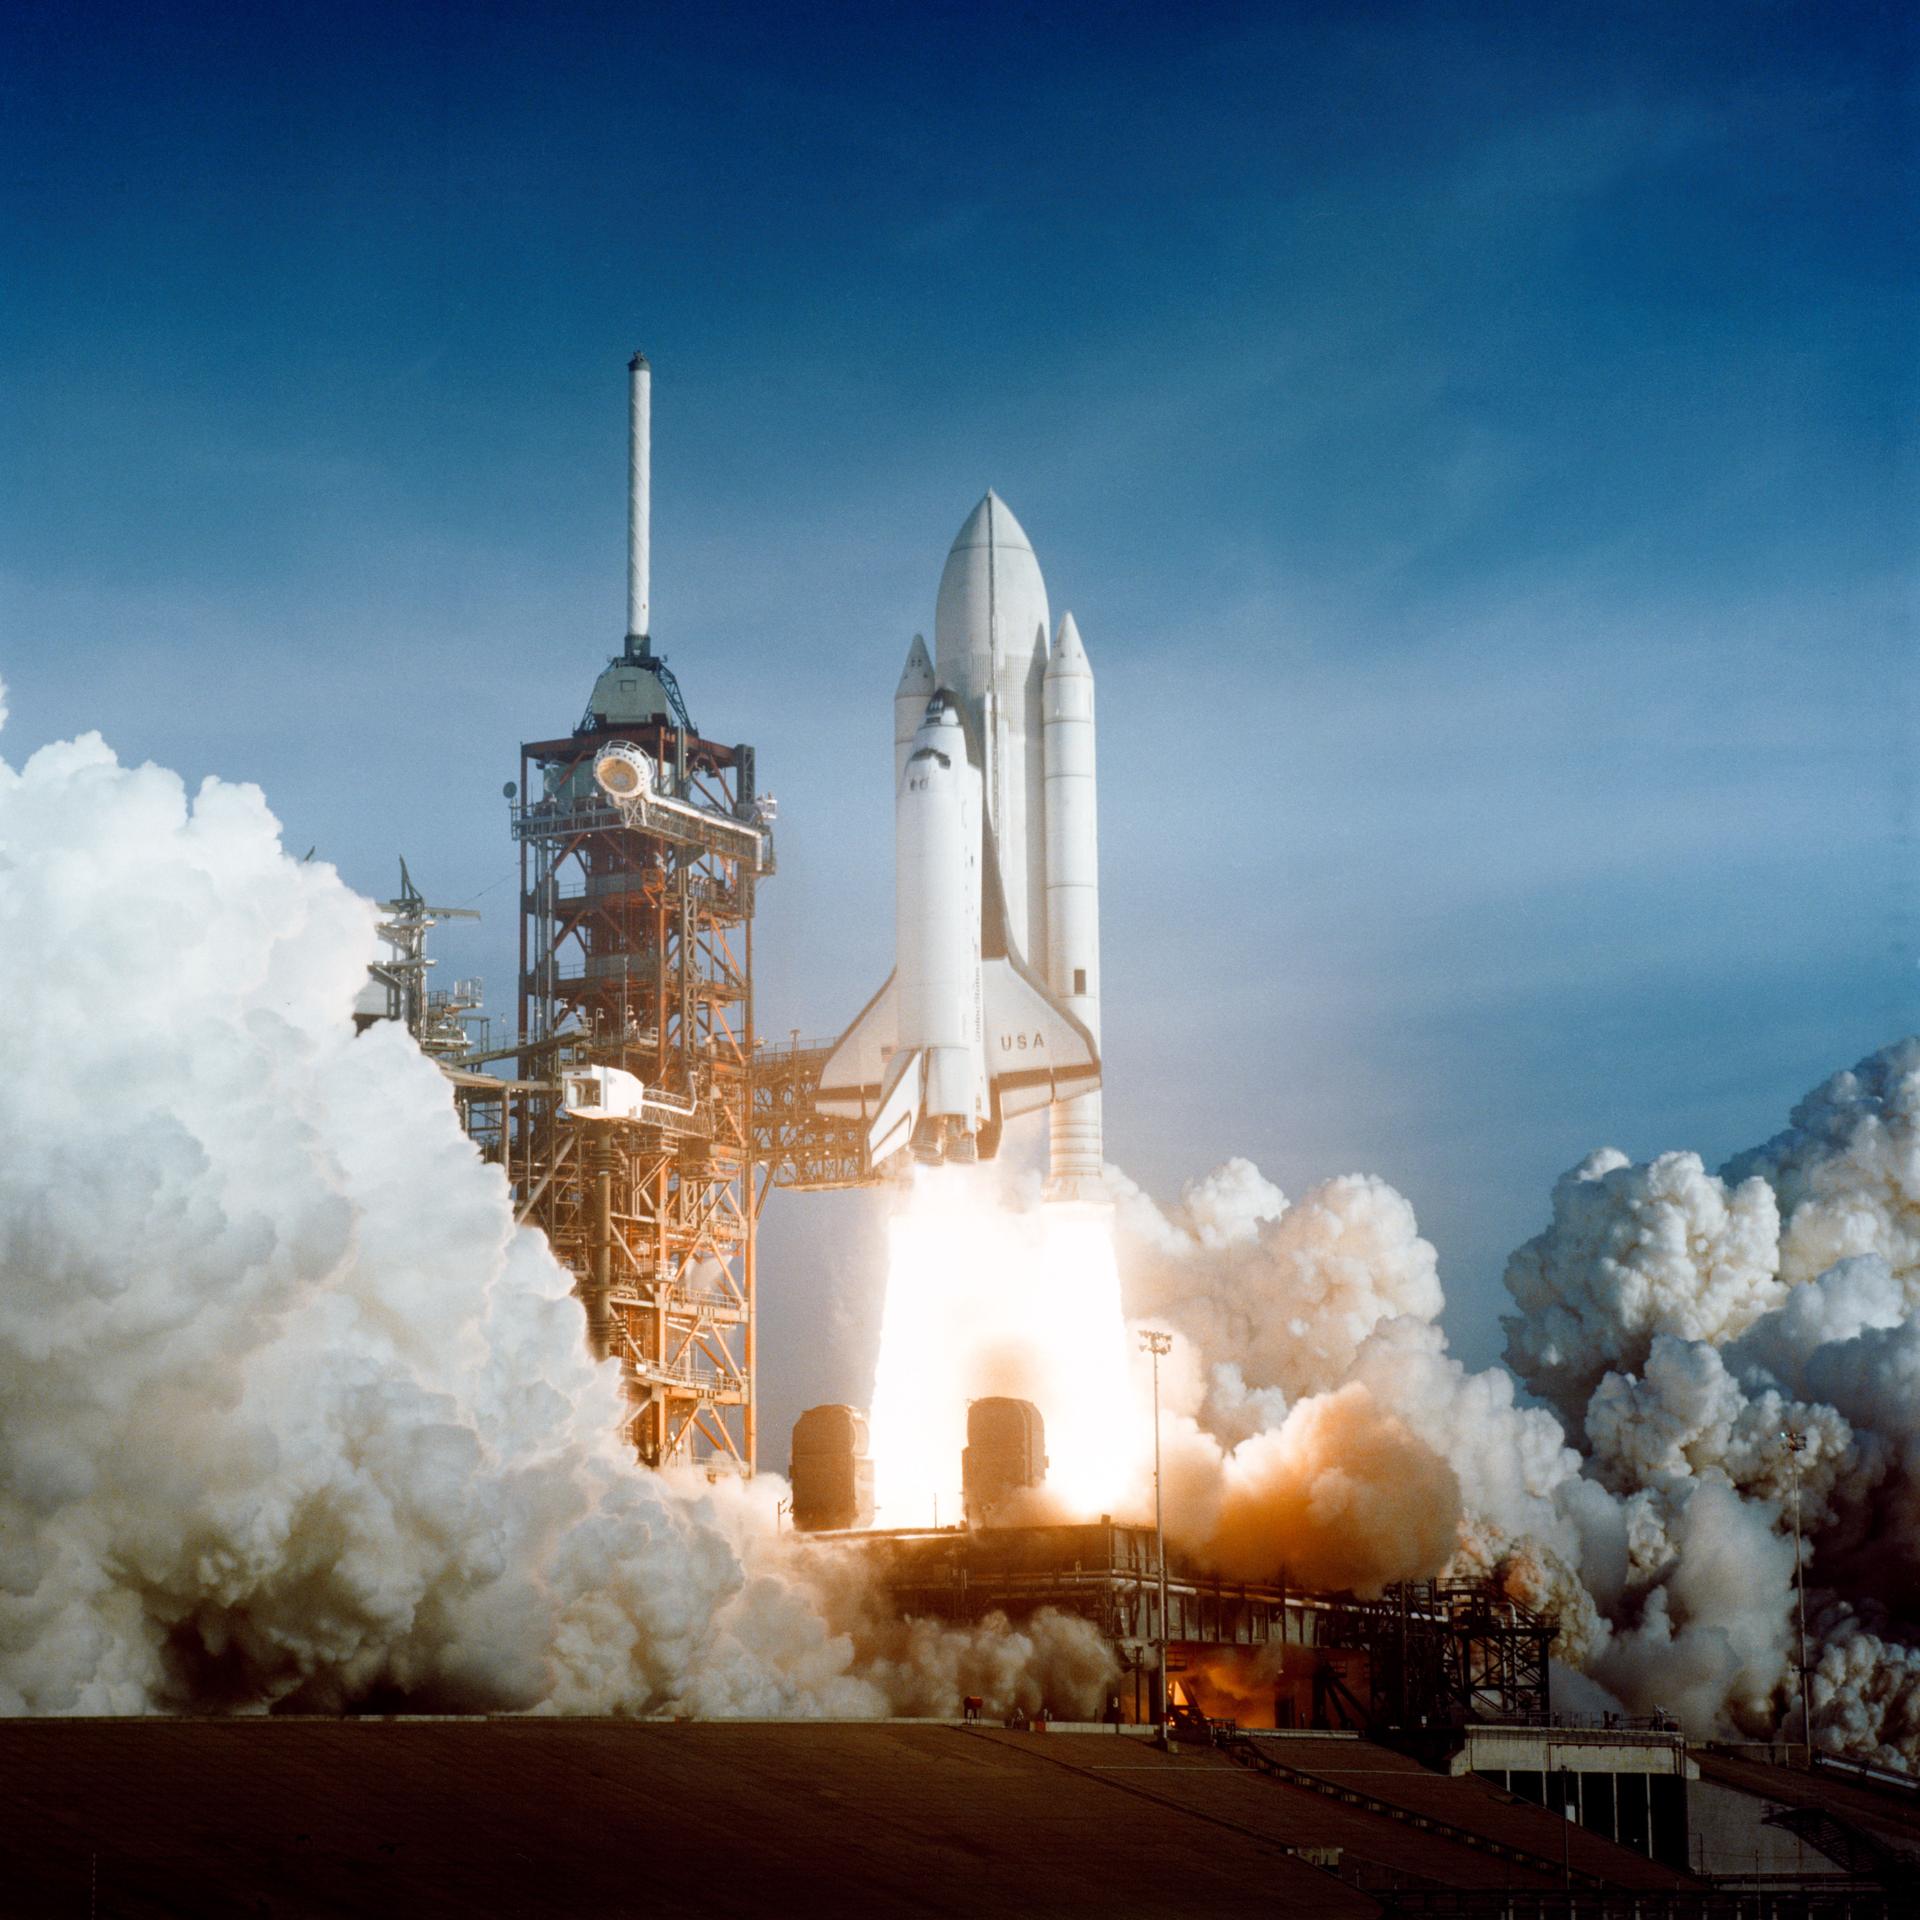 Space shuttle Columbia roared off Launch Pad 39A on April 12, 1981, at 7 a.m., on the first shuttle mission, STS-1.